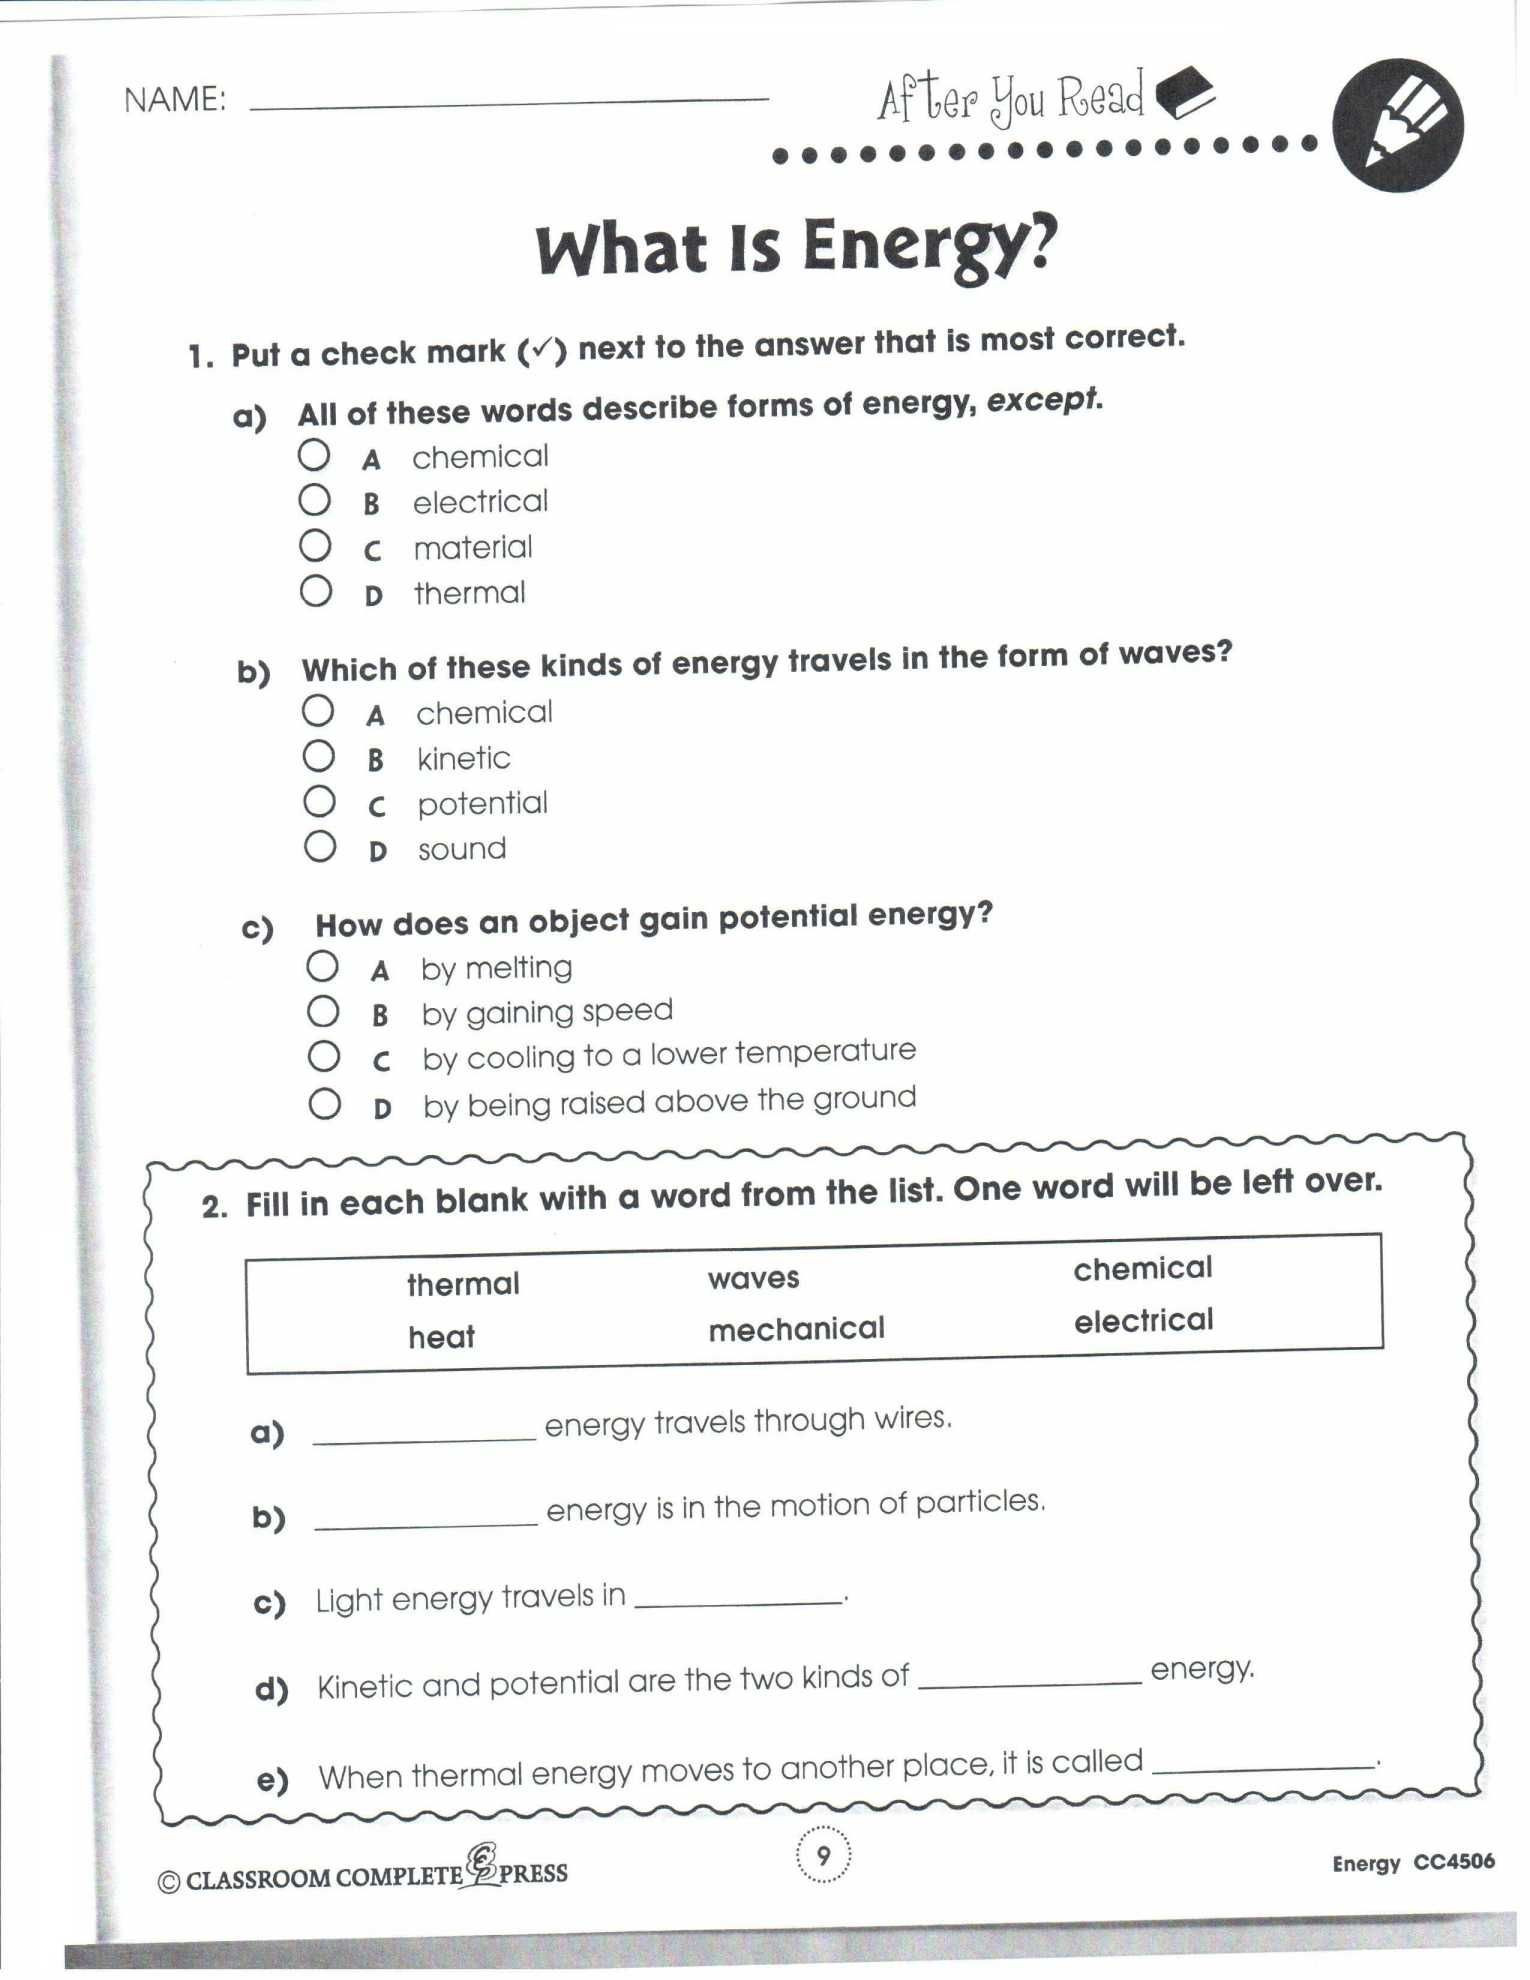 Chemistry Of Life Worksheet Chapter 2 the Chemistry Life Worksheet Answers Nidecmege